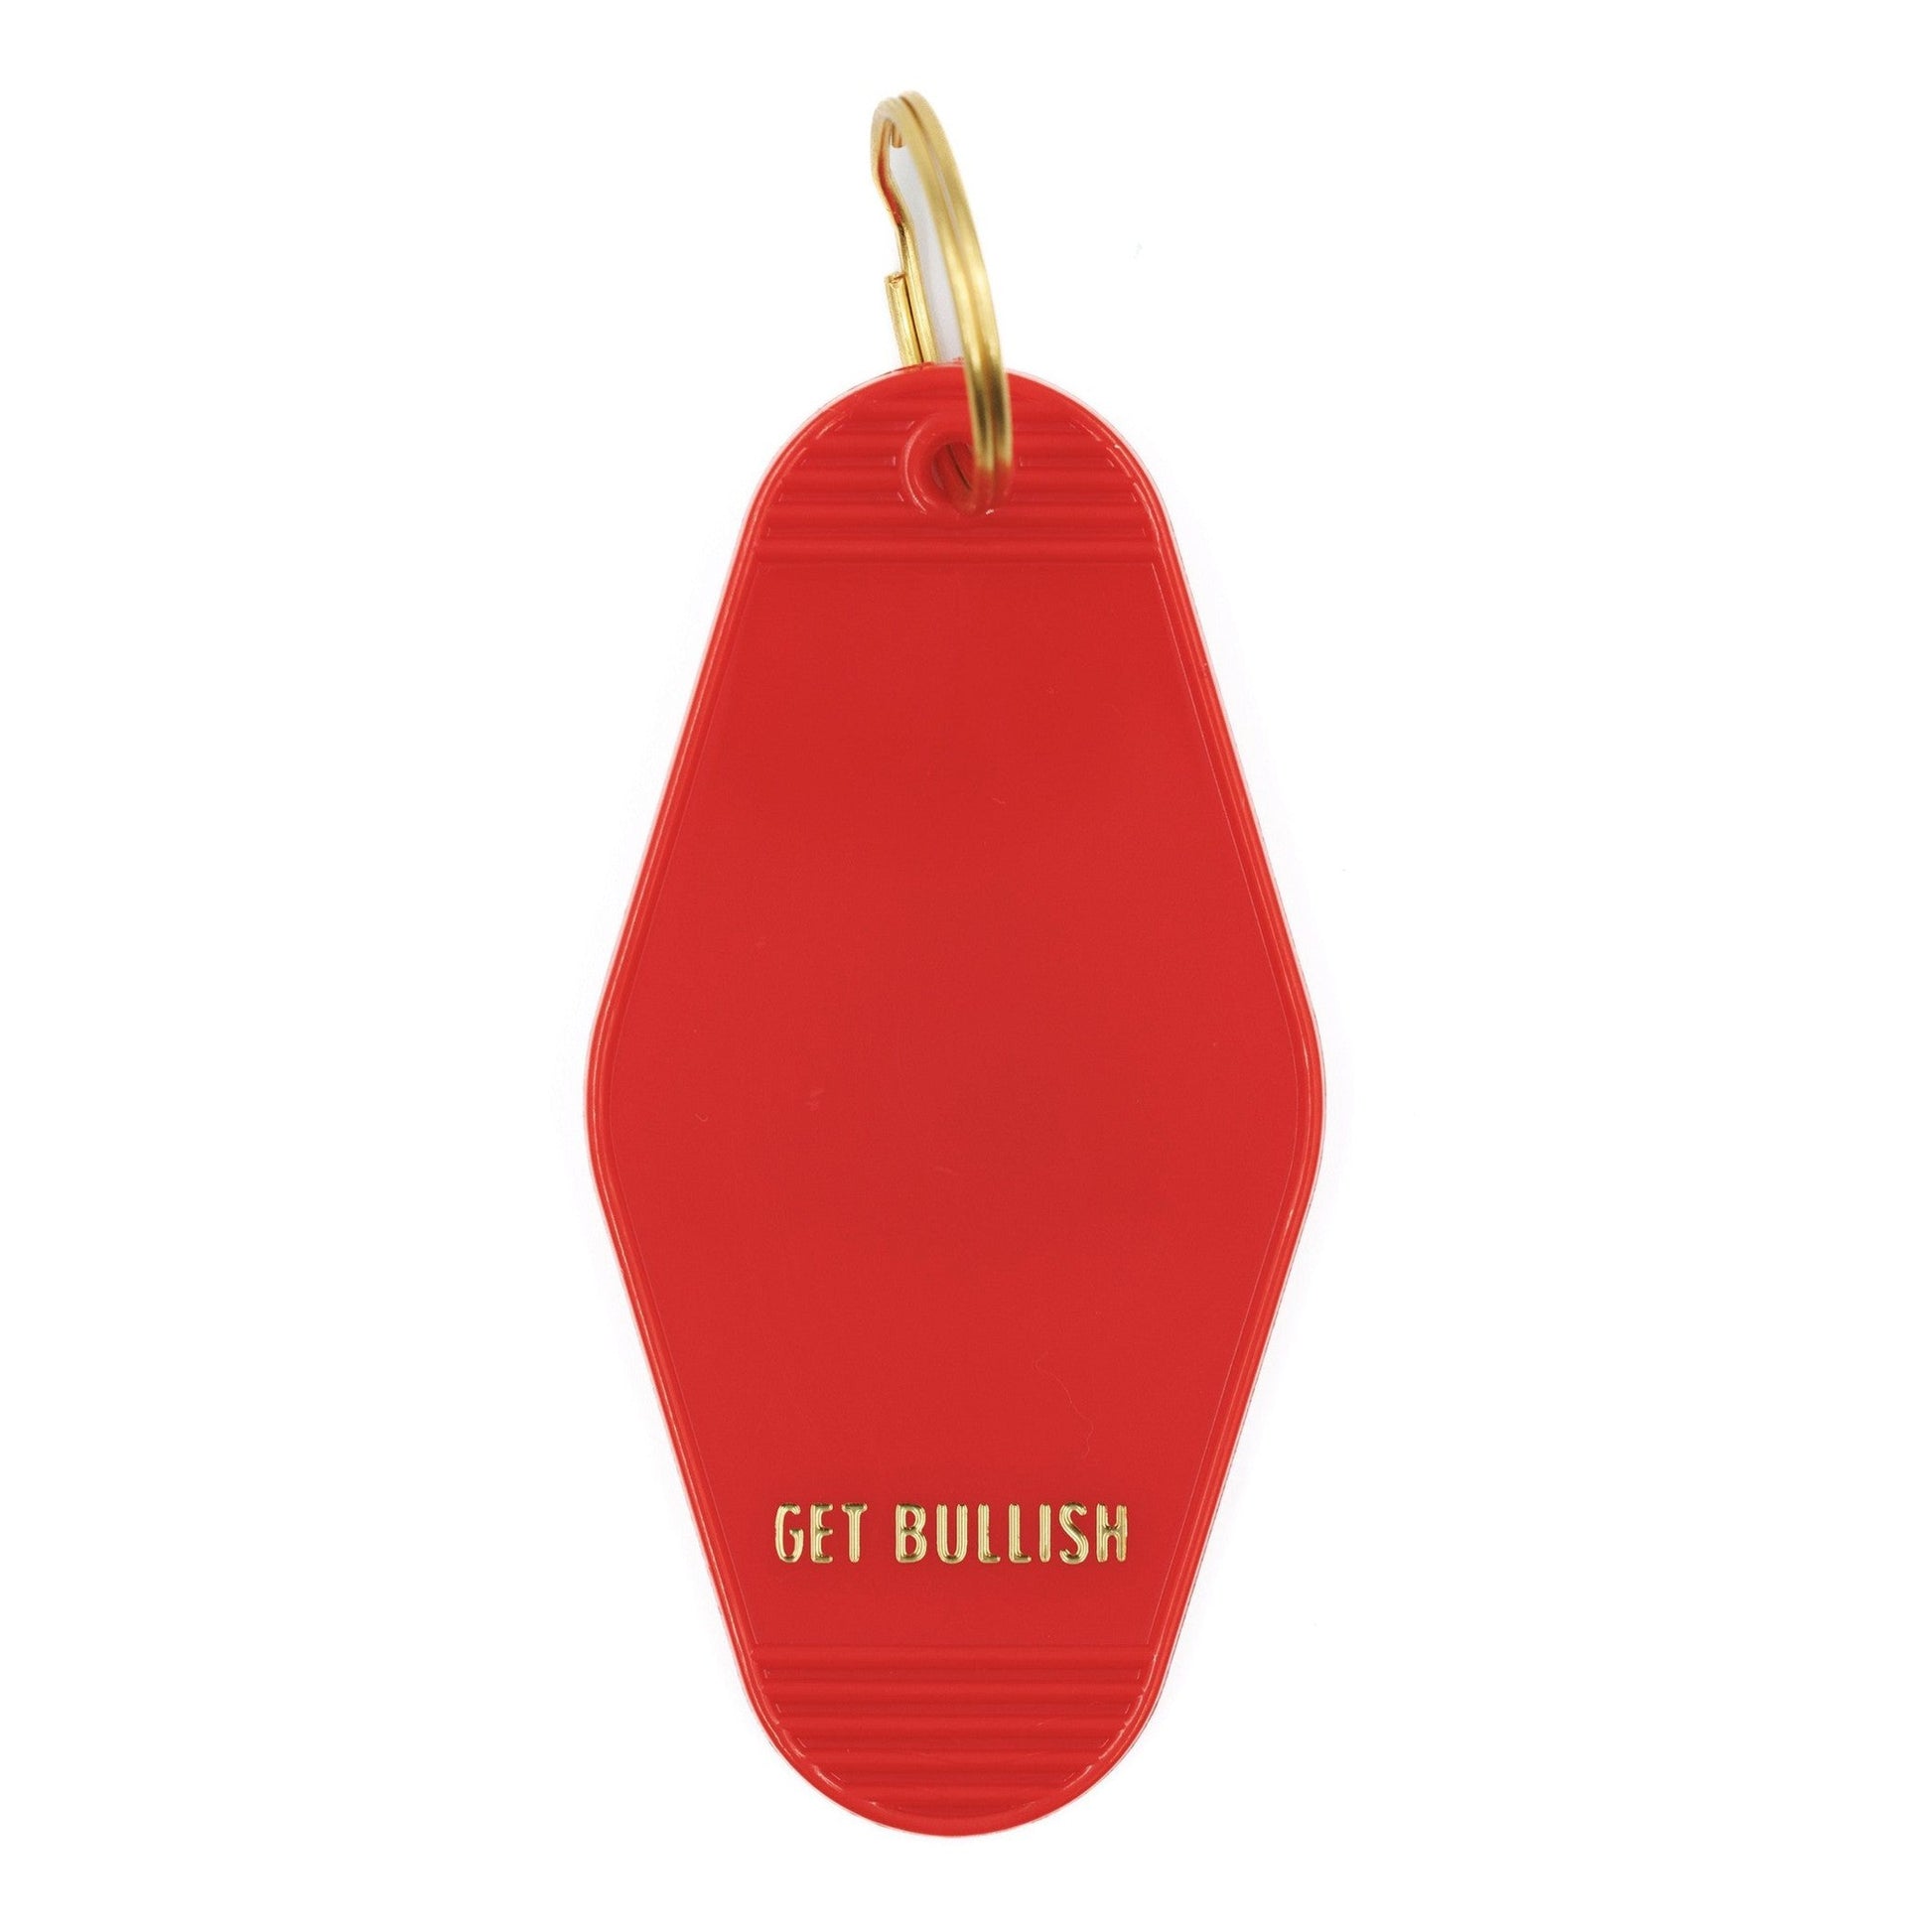 Big Clit Energy Motel Style Keychain in Red and Gold